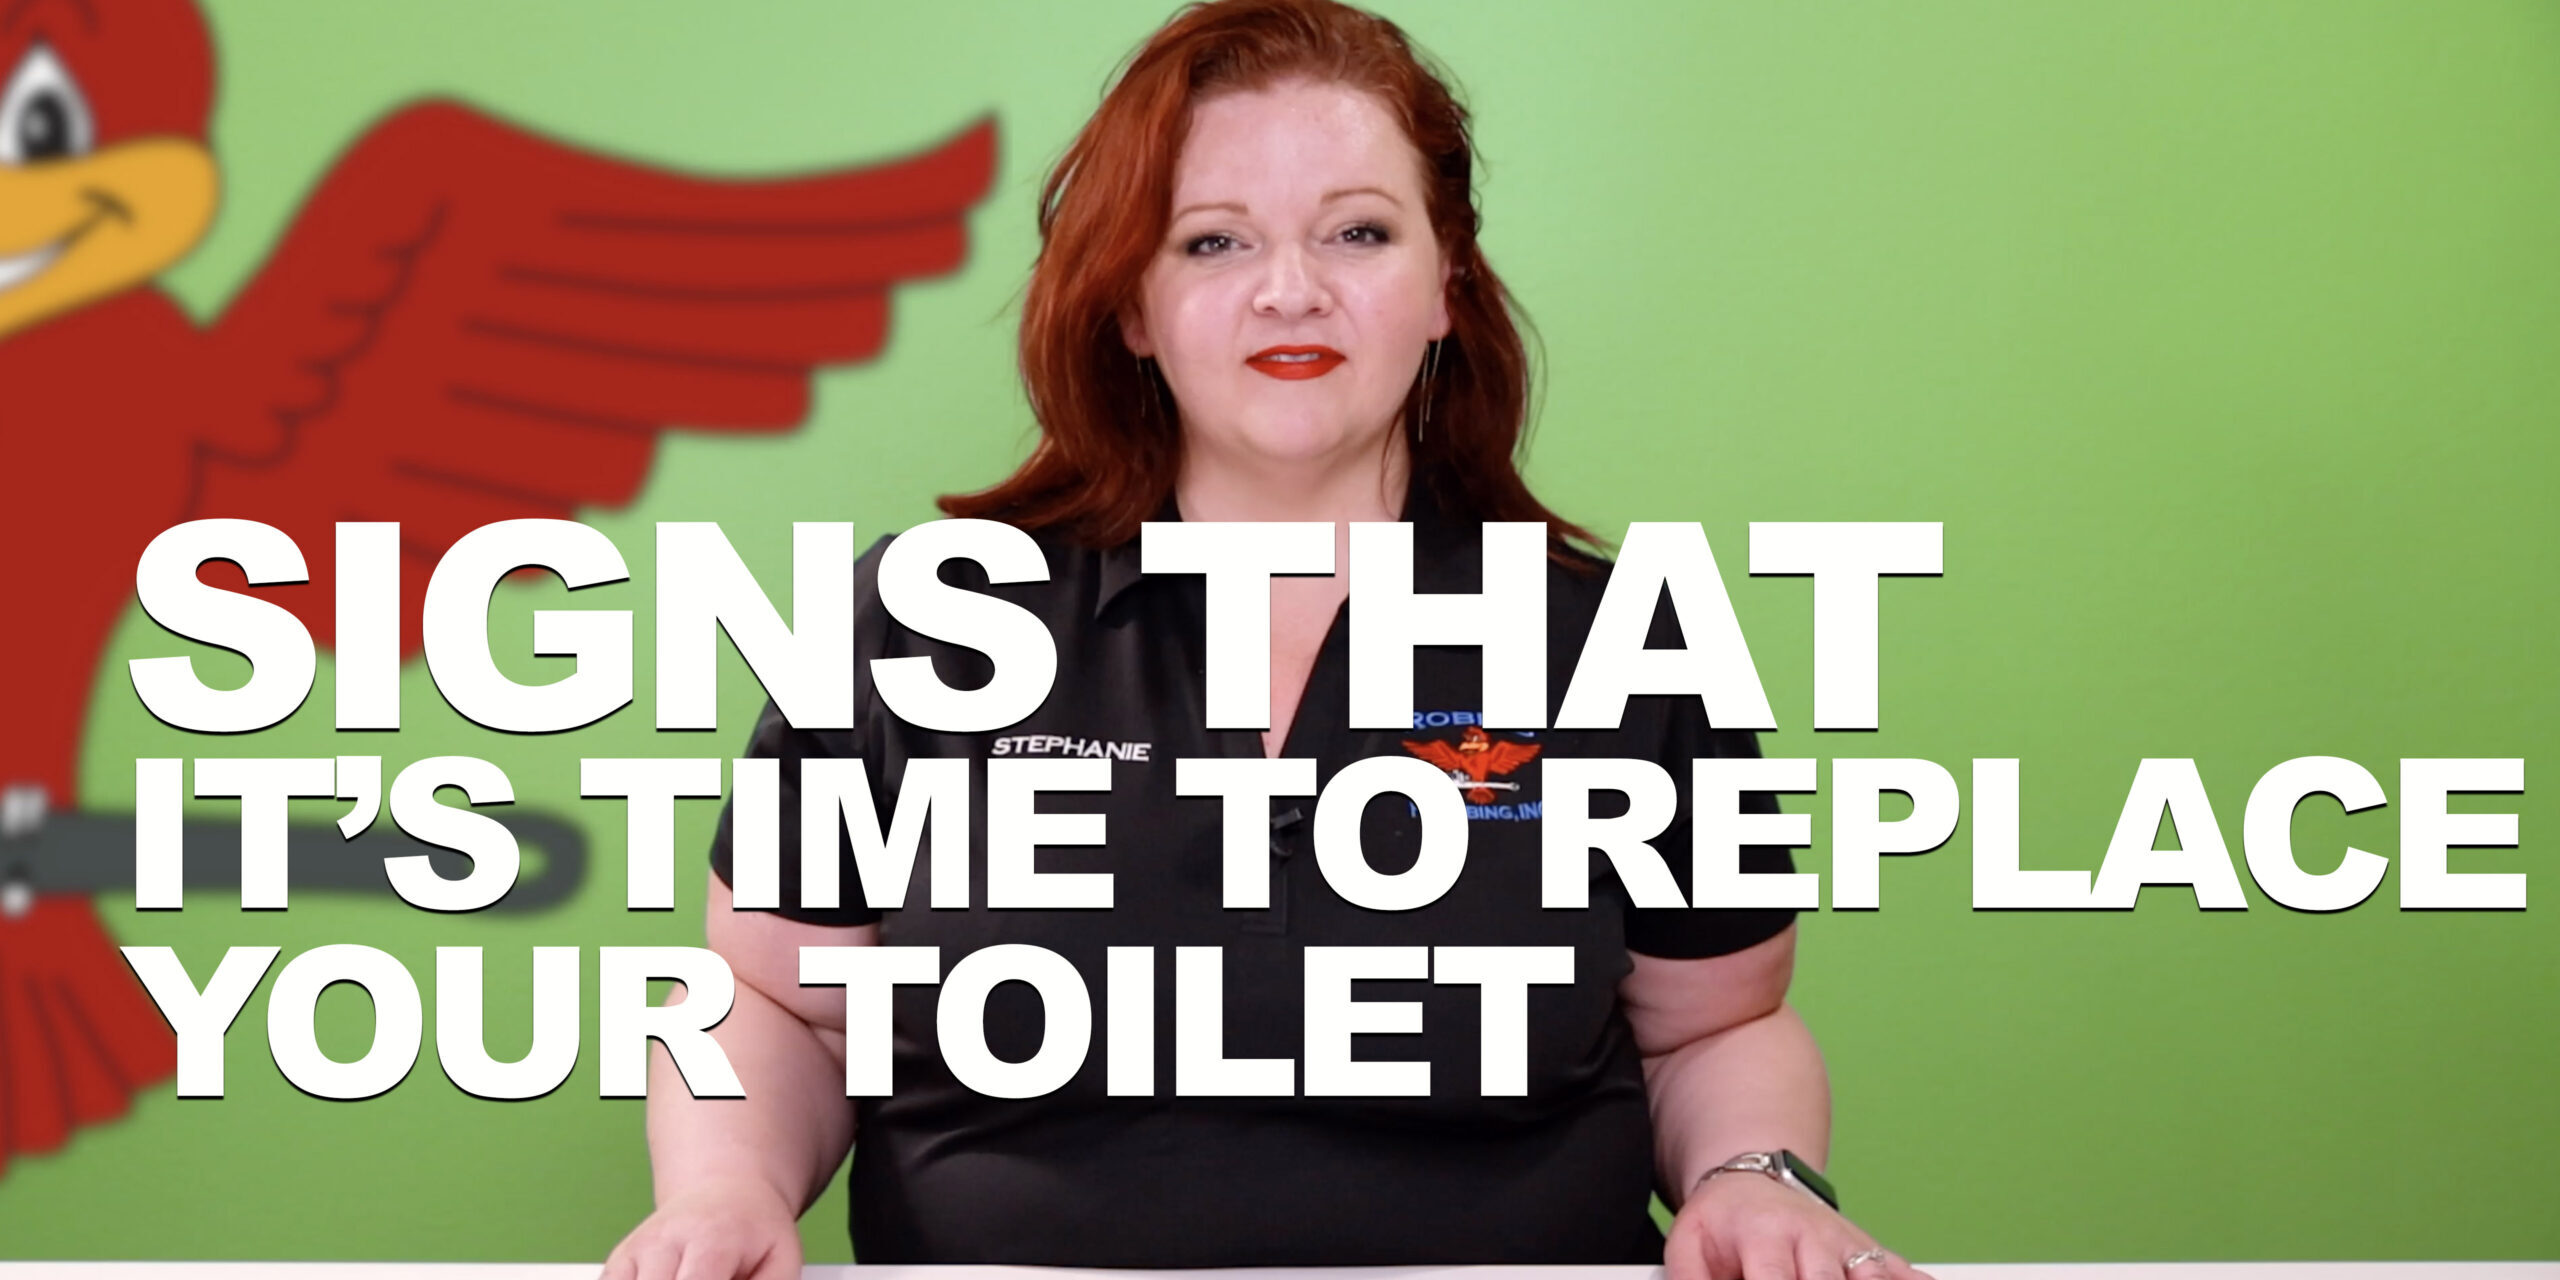 Cover photo for blog and video "Signs It's Time to Replace Your Toilet"